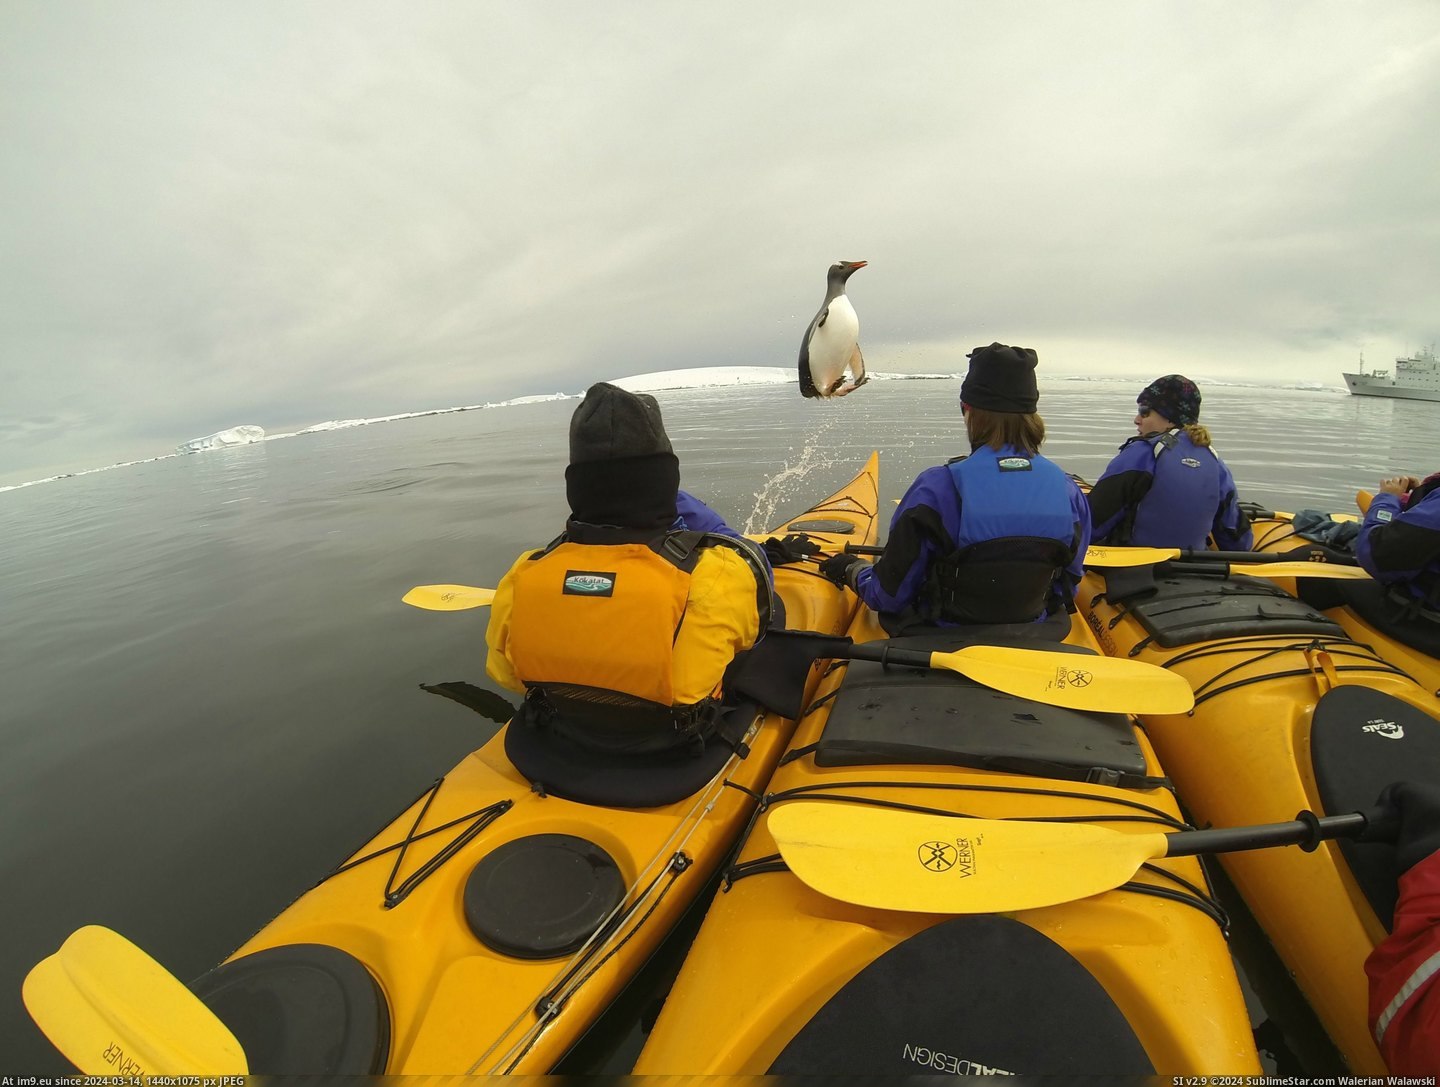 #One #Caught #Group #Antarctica #Kayakers #Trip #Penguin #Jumping [Pics] One of the Kayakers on my recent trip to Antarctica caught a penguin jumping into their group. Pic. (Image of album My r/PICS favs))